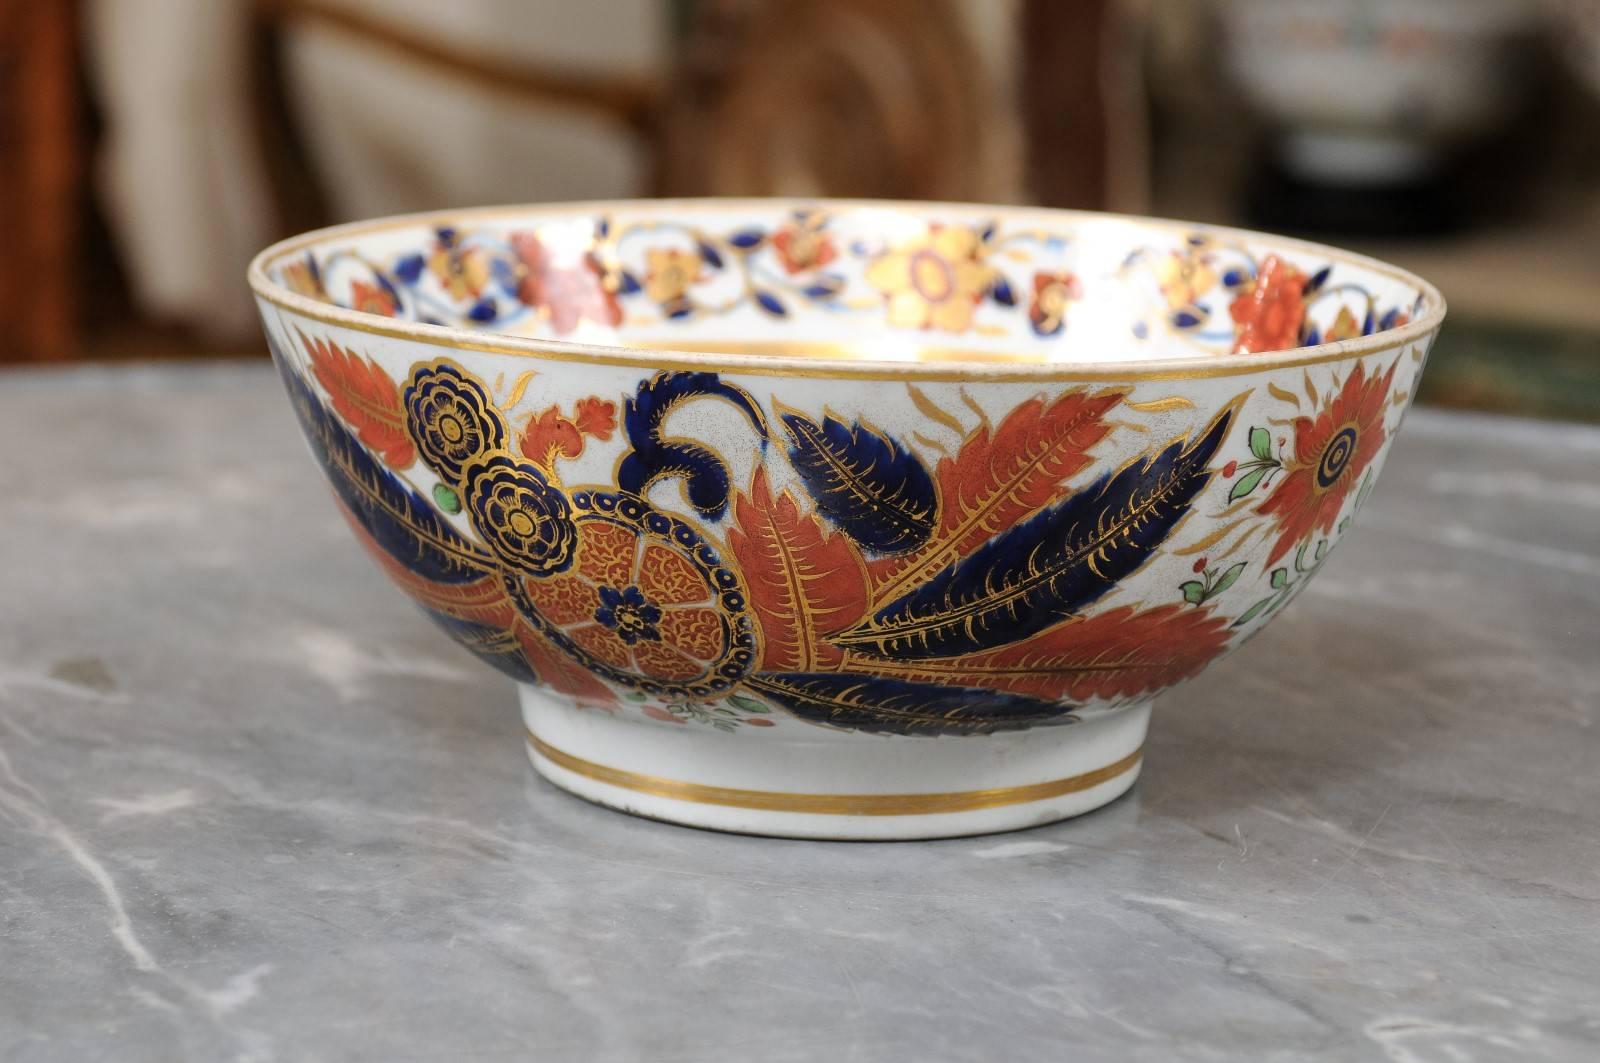 Spode “Tabacco Leaf” Punch Bowl after Chinese Export Design, England, ca. 1820 For Sale 1